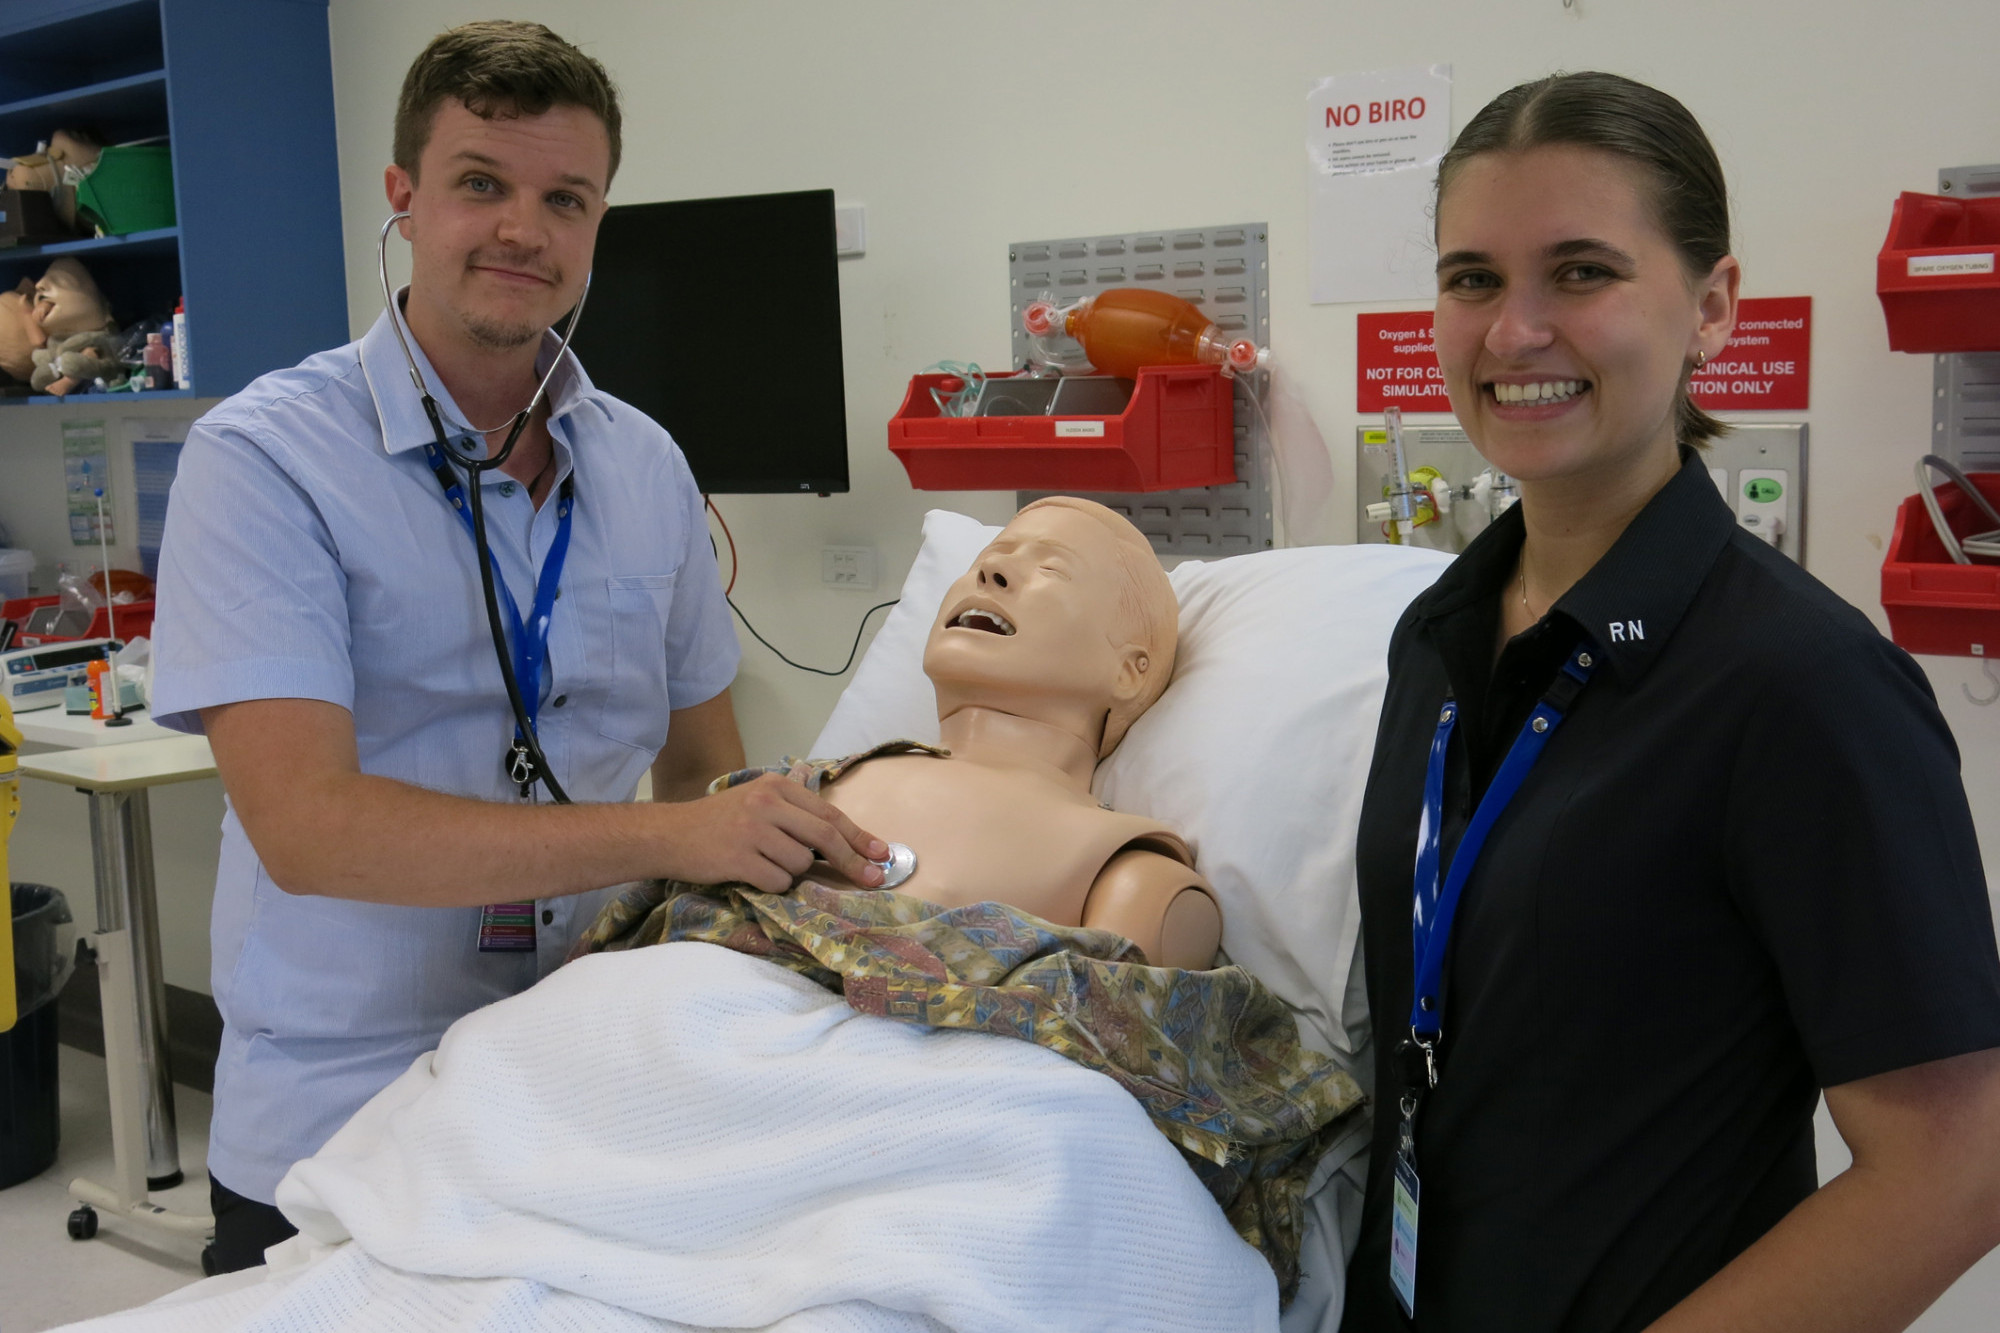 New registered nurses Michael Langguth and Miah Donnelly pretending to treat a patient at Cairns Hospital